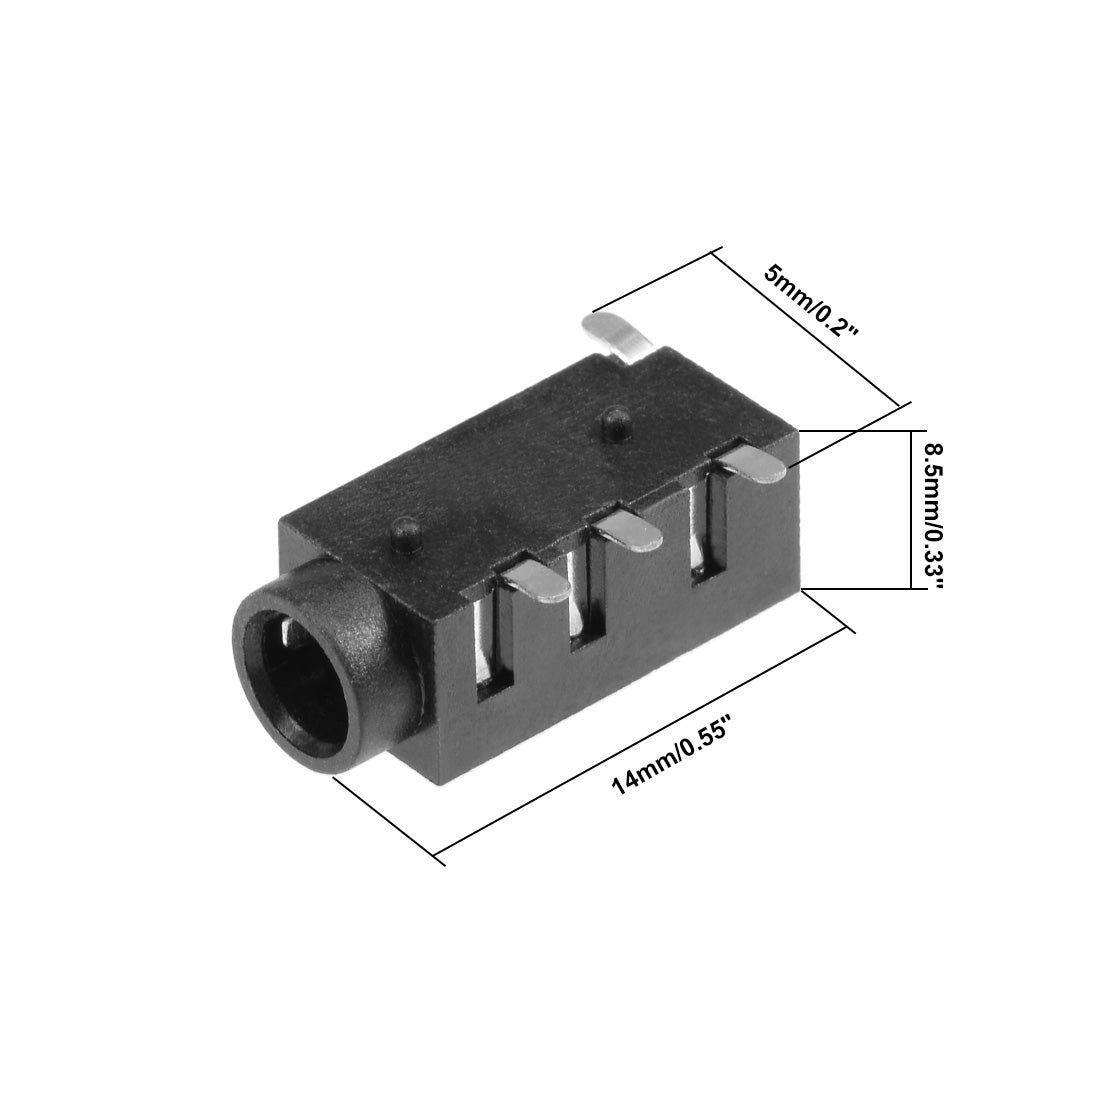 uxcell Uxcell 100Pcs PCB Mount 3.5mm 4 Pin Socket Headphone Stereo Jack Audio Video Connector Black PJ320D